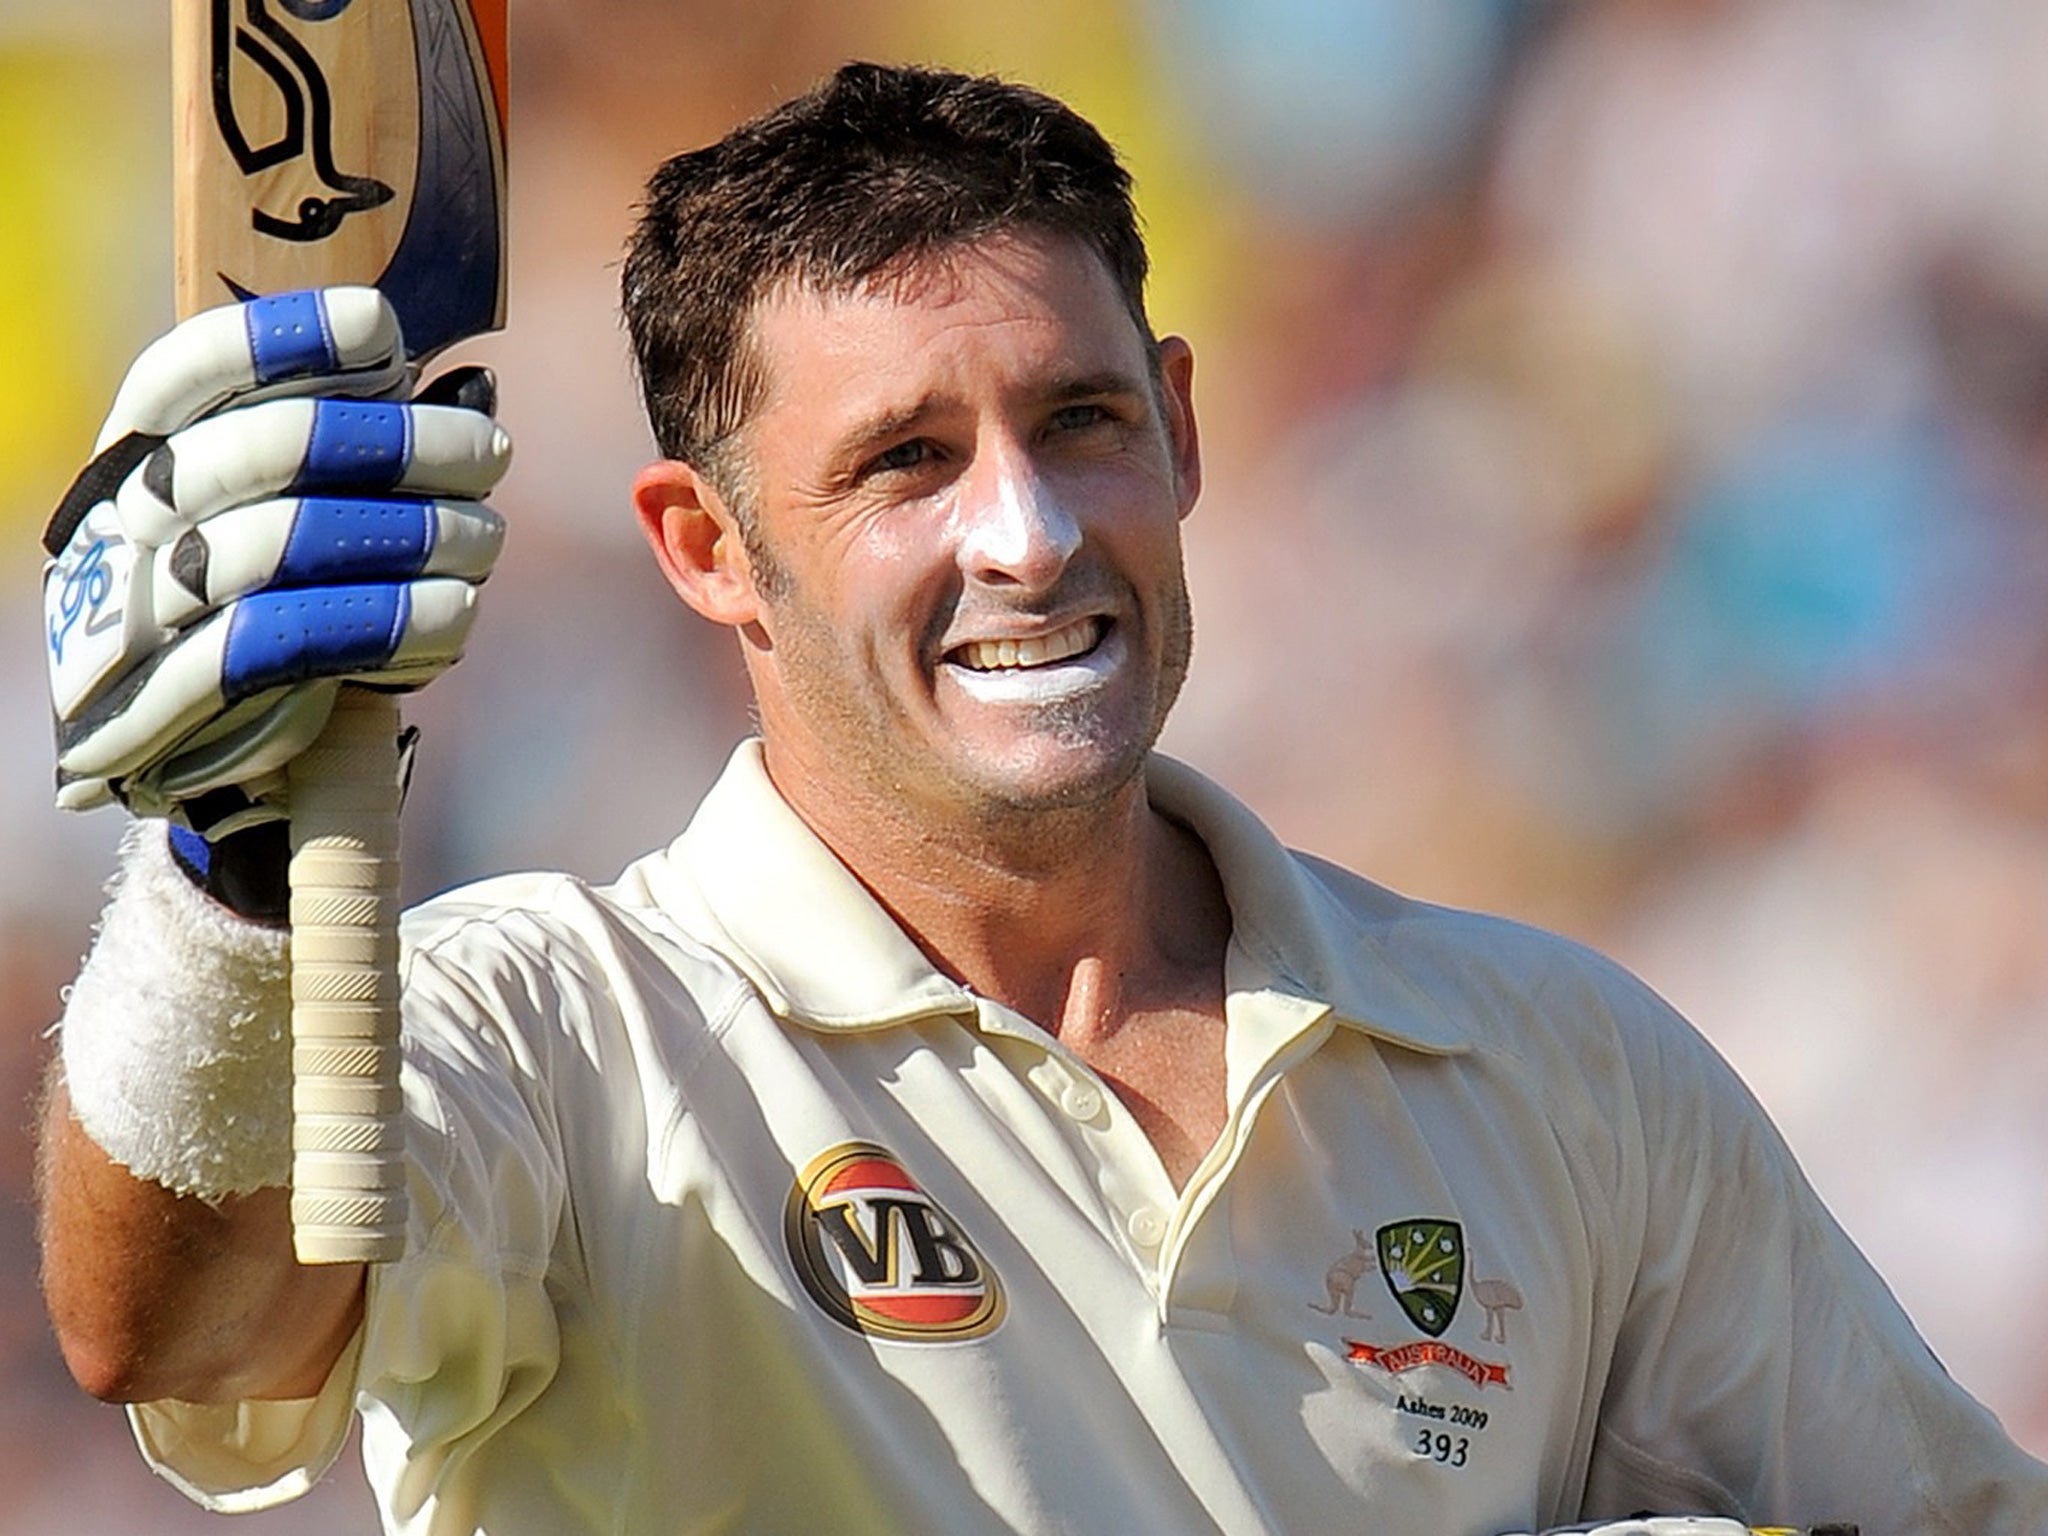 With Michael Hussey announcing his intention to quit international cricket just weeks after ex-captain Ricky Ponting retired, Australia could turn to England for a replacement ahead of the Ashes this summer